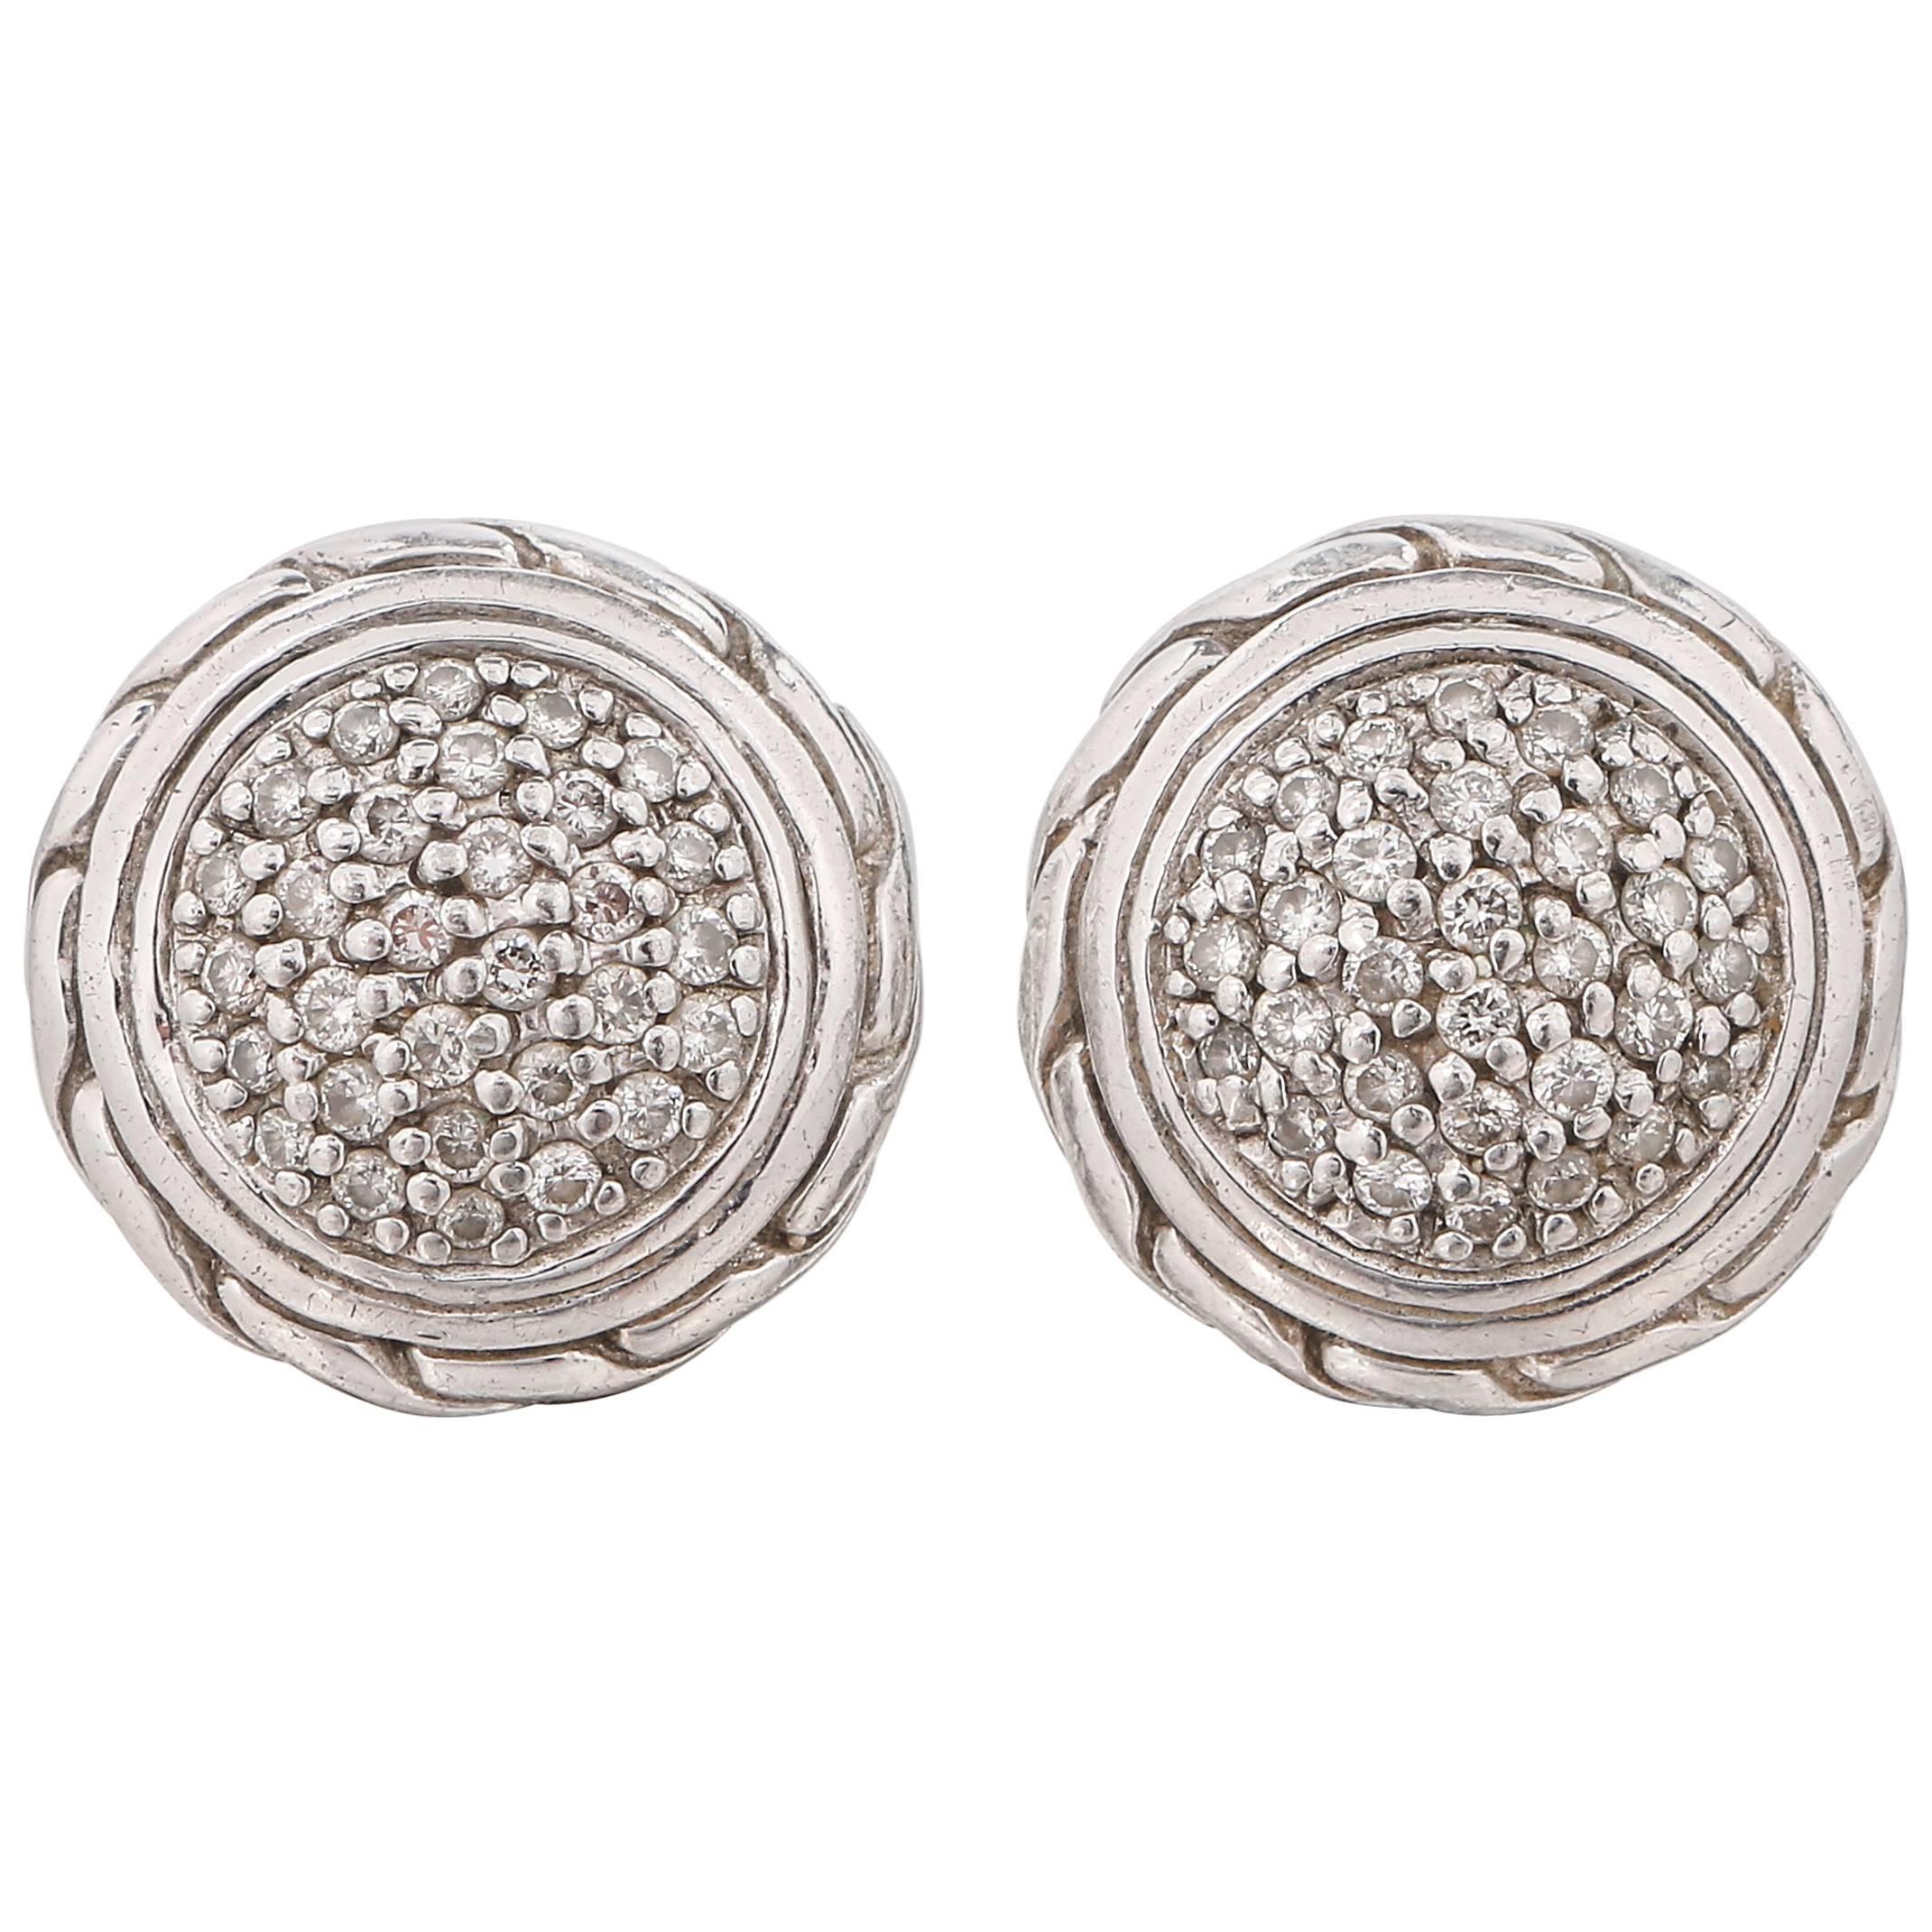 JOHN HARDY "Classic Chain" Round Pave Diamond 18K Sterling Silver Stud Earrings